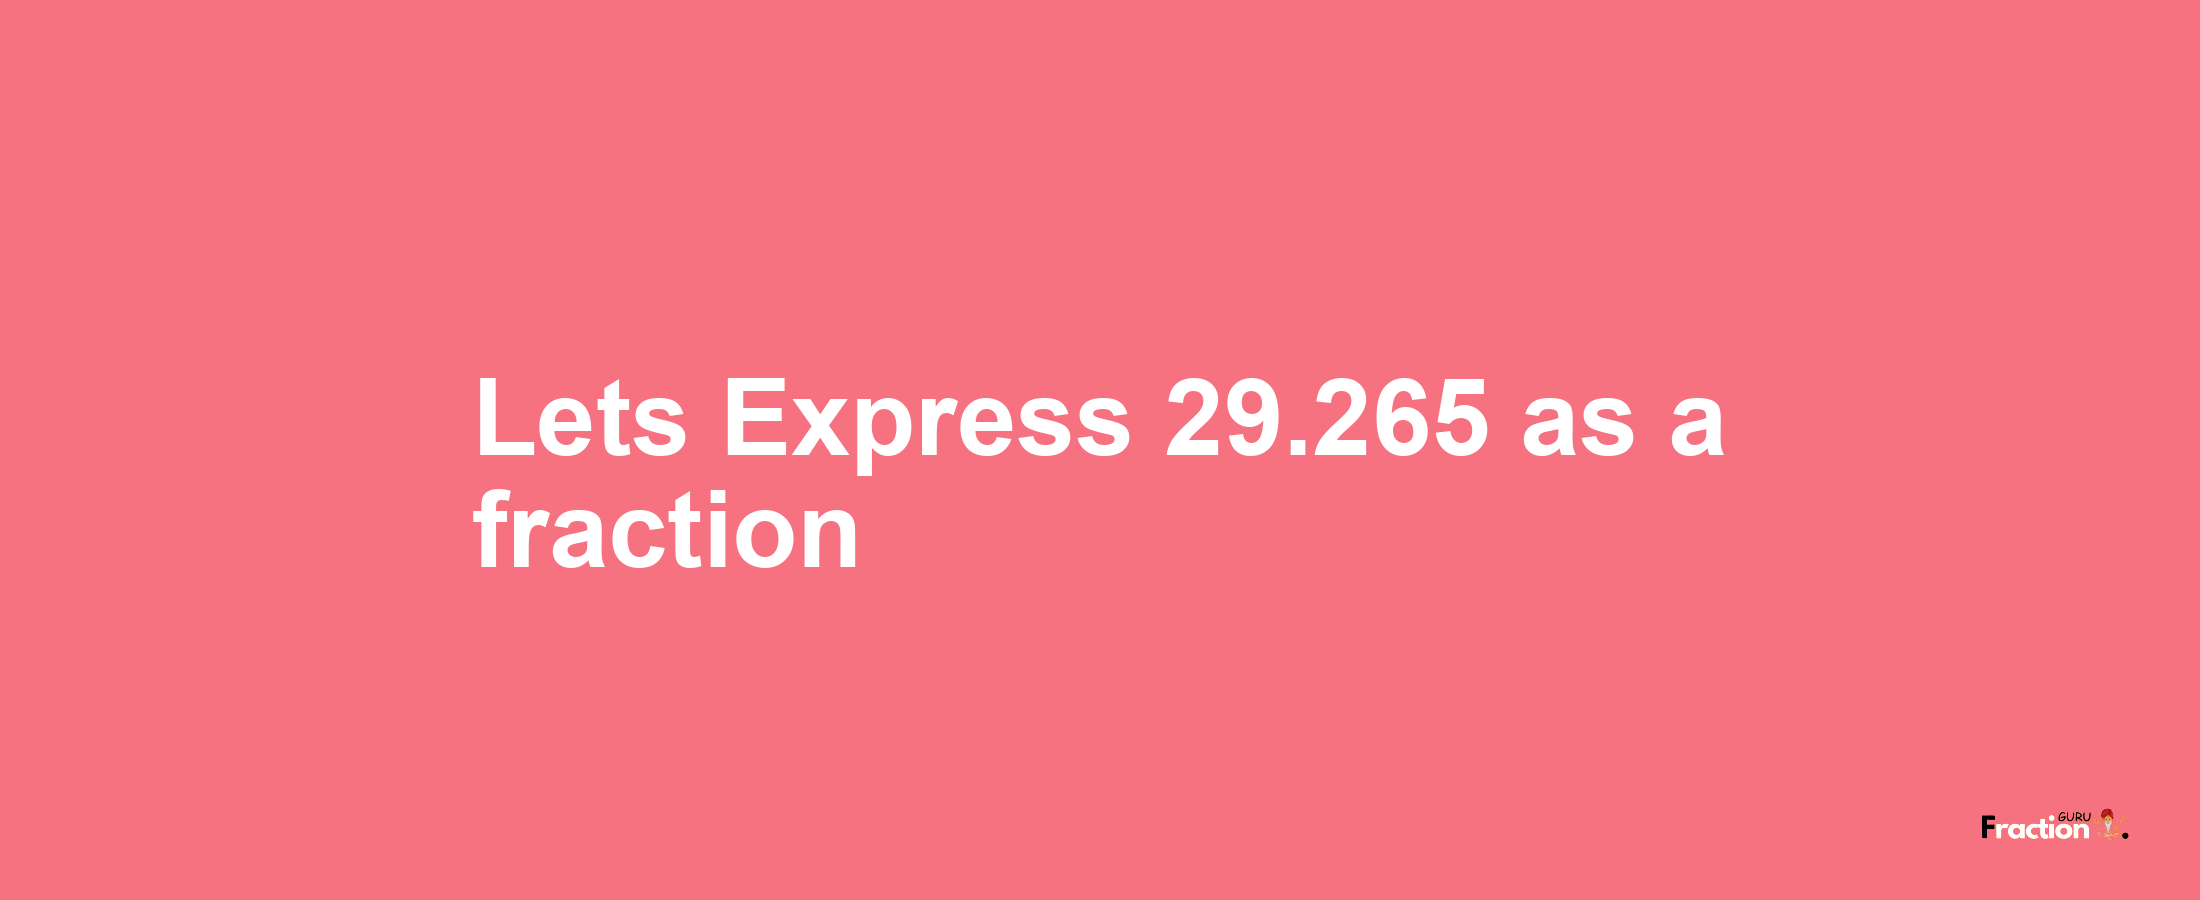 Lets Express 29.265 as afraction